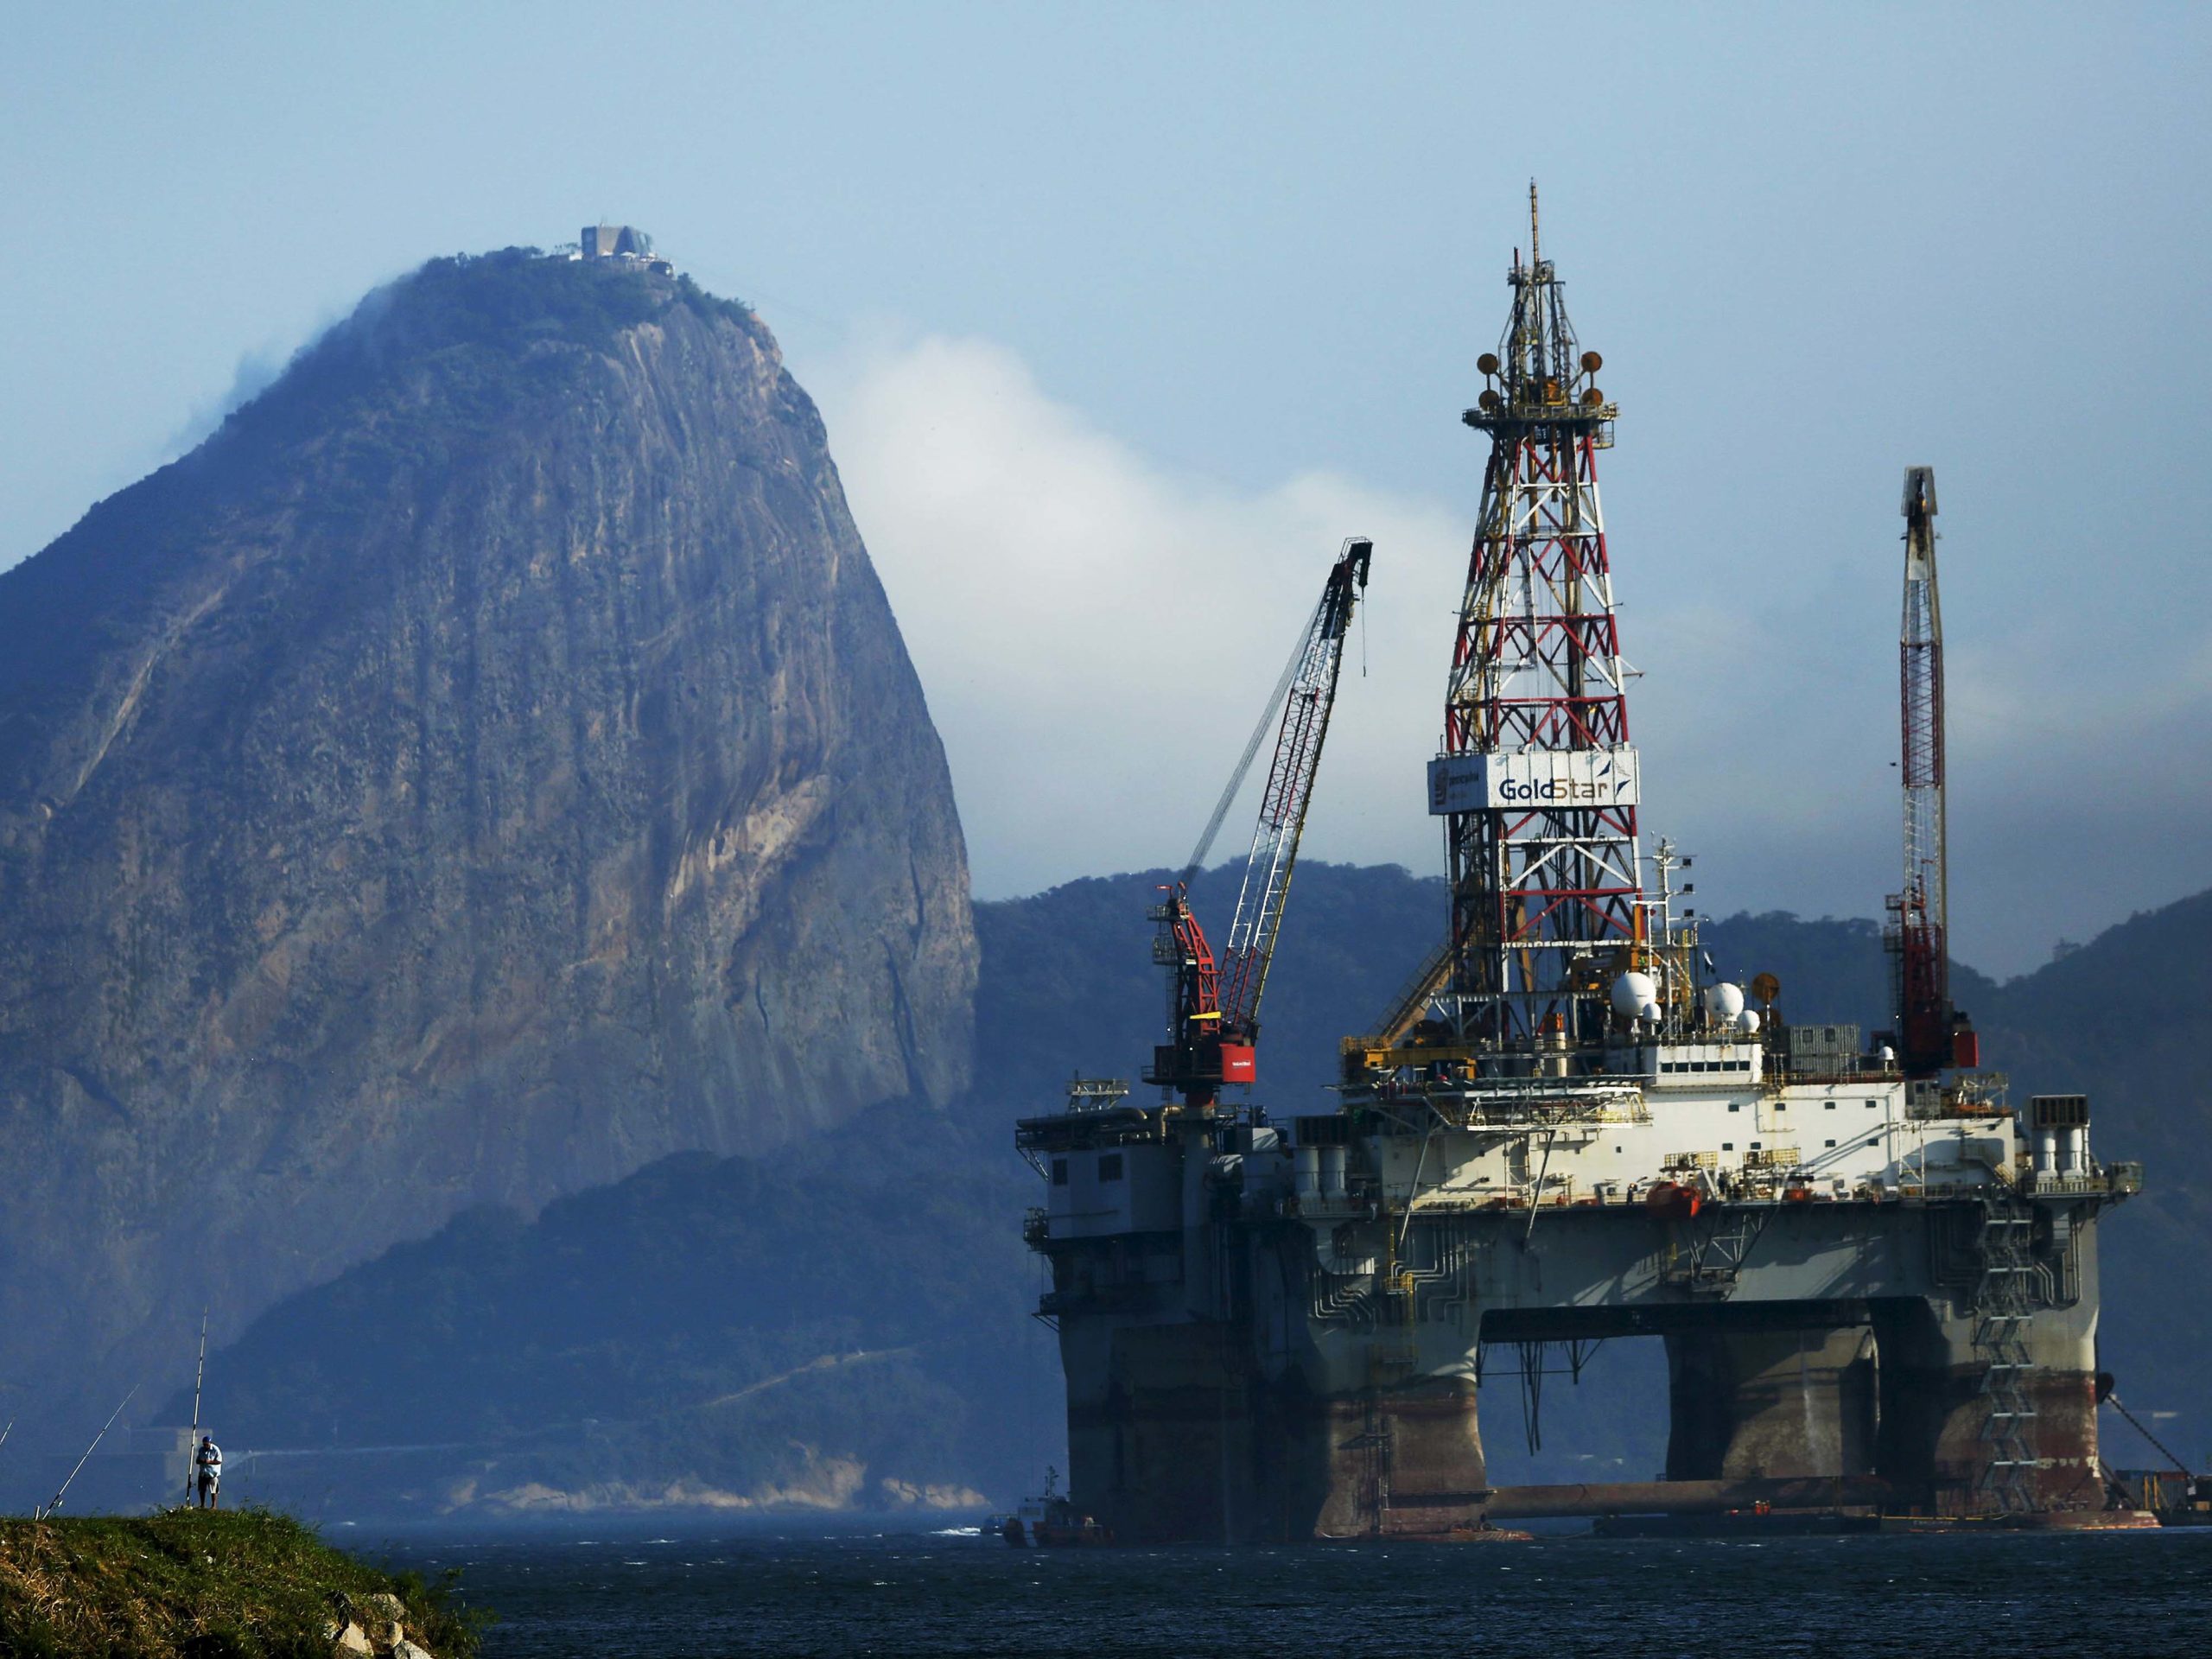 Oil Now Competes With Soy And Iron Ore as Brazil's Top Export- An oil platform is pictured in Guanabara Bay with the Sugar Loaf Mountain in the background in Niteroi, near Rio de Janeiro. (Photo Internet reproduction